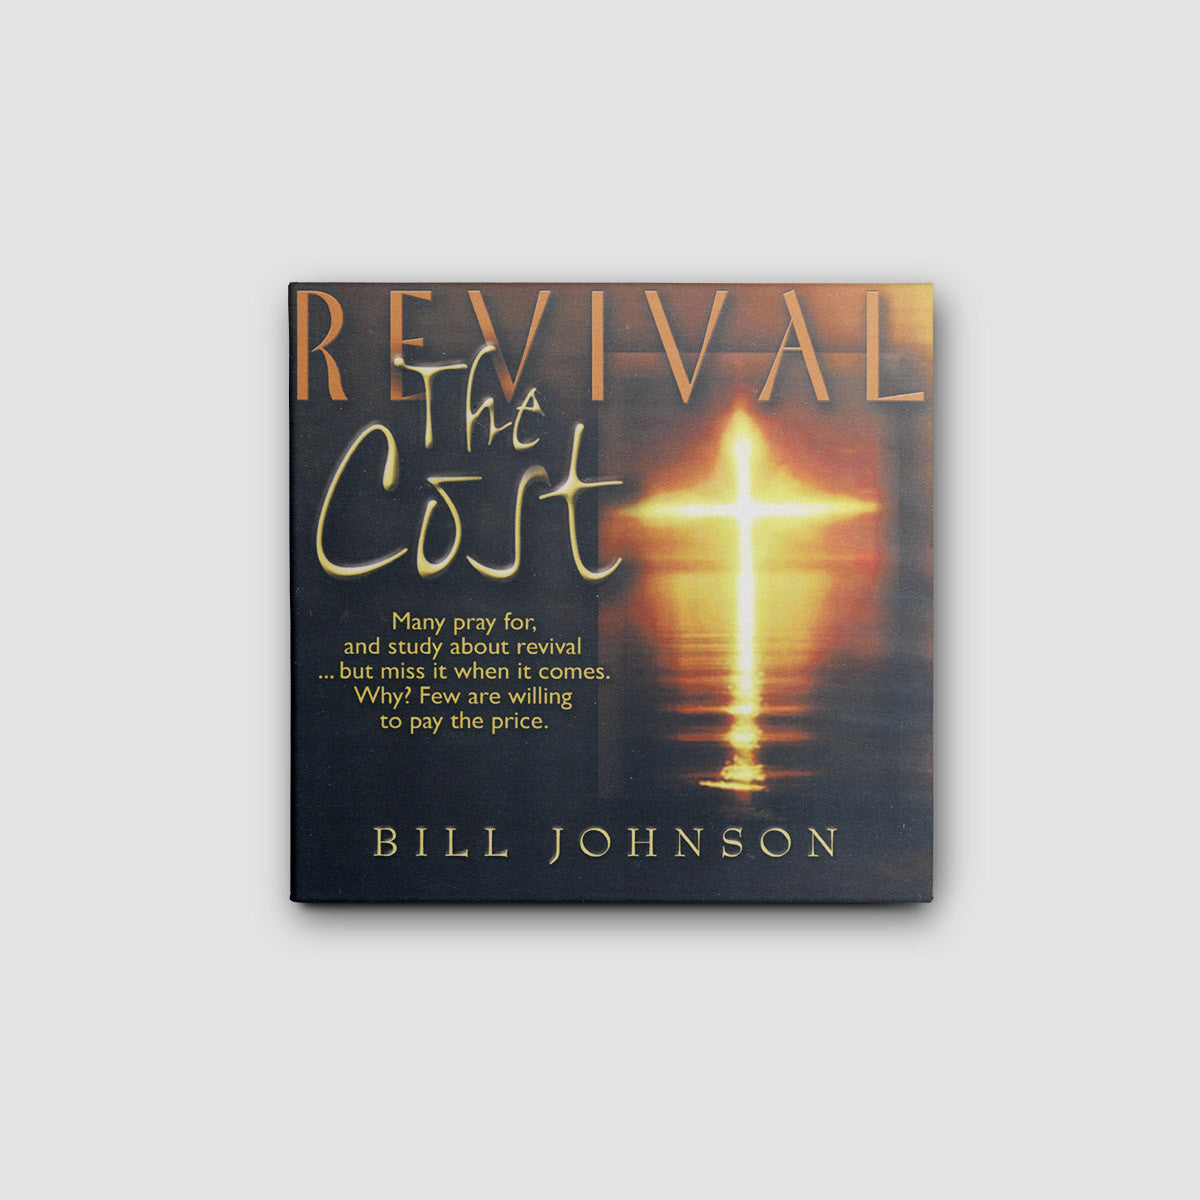 REVIVAL: The Cost